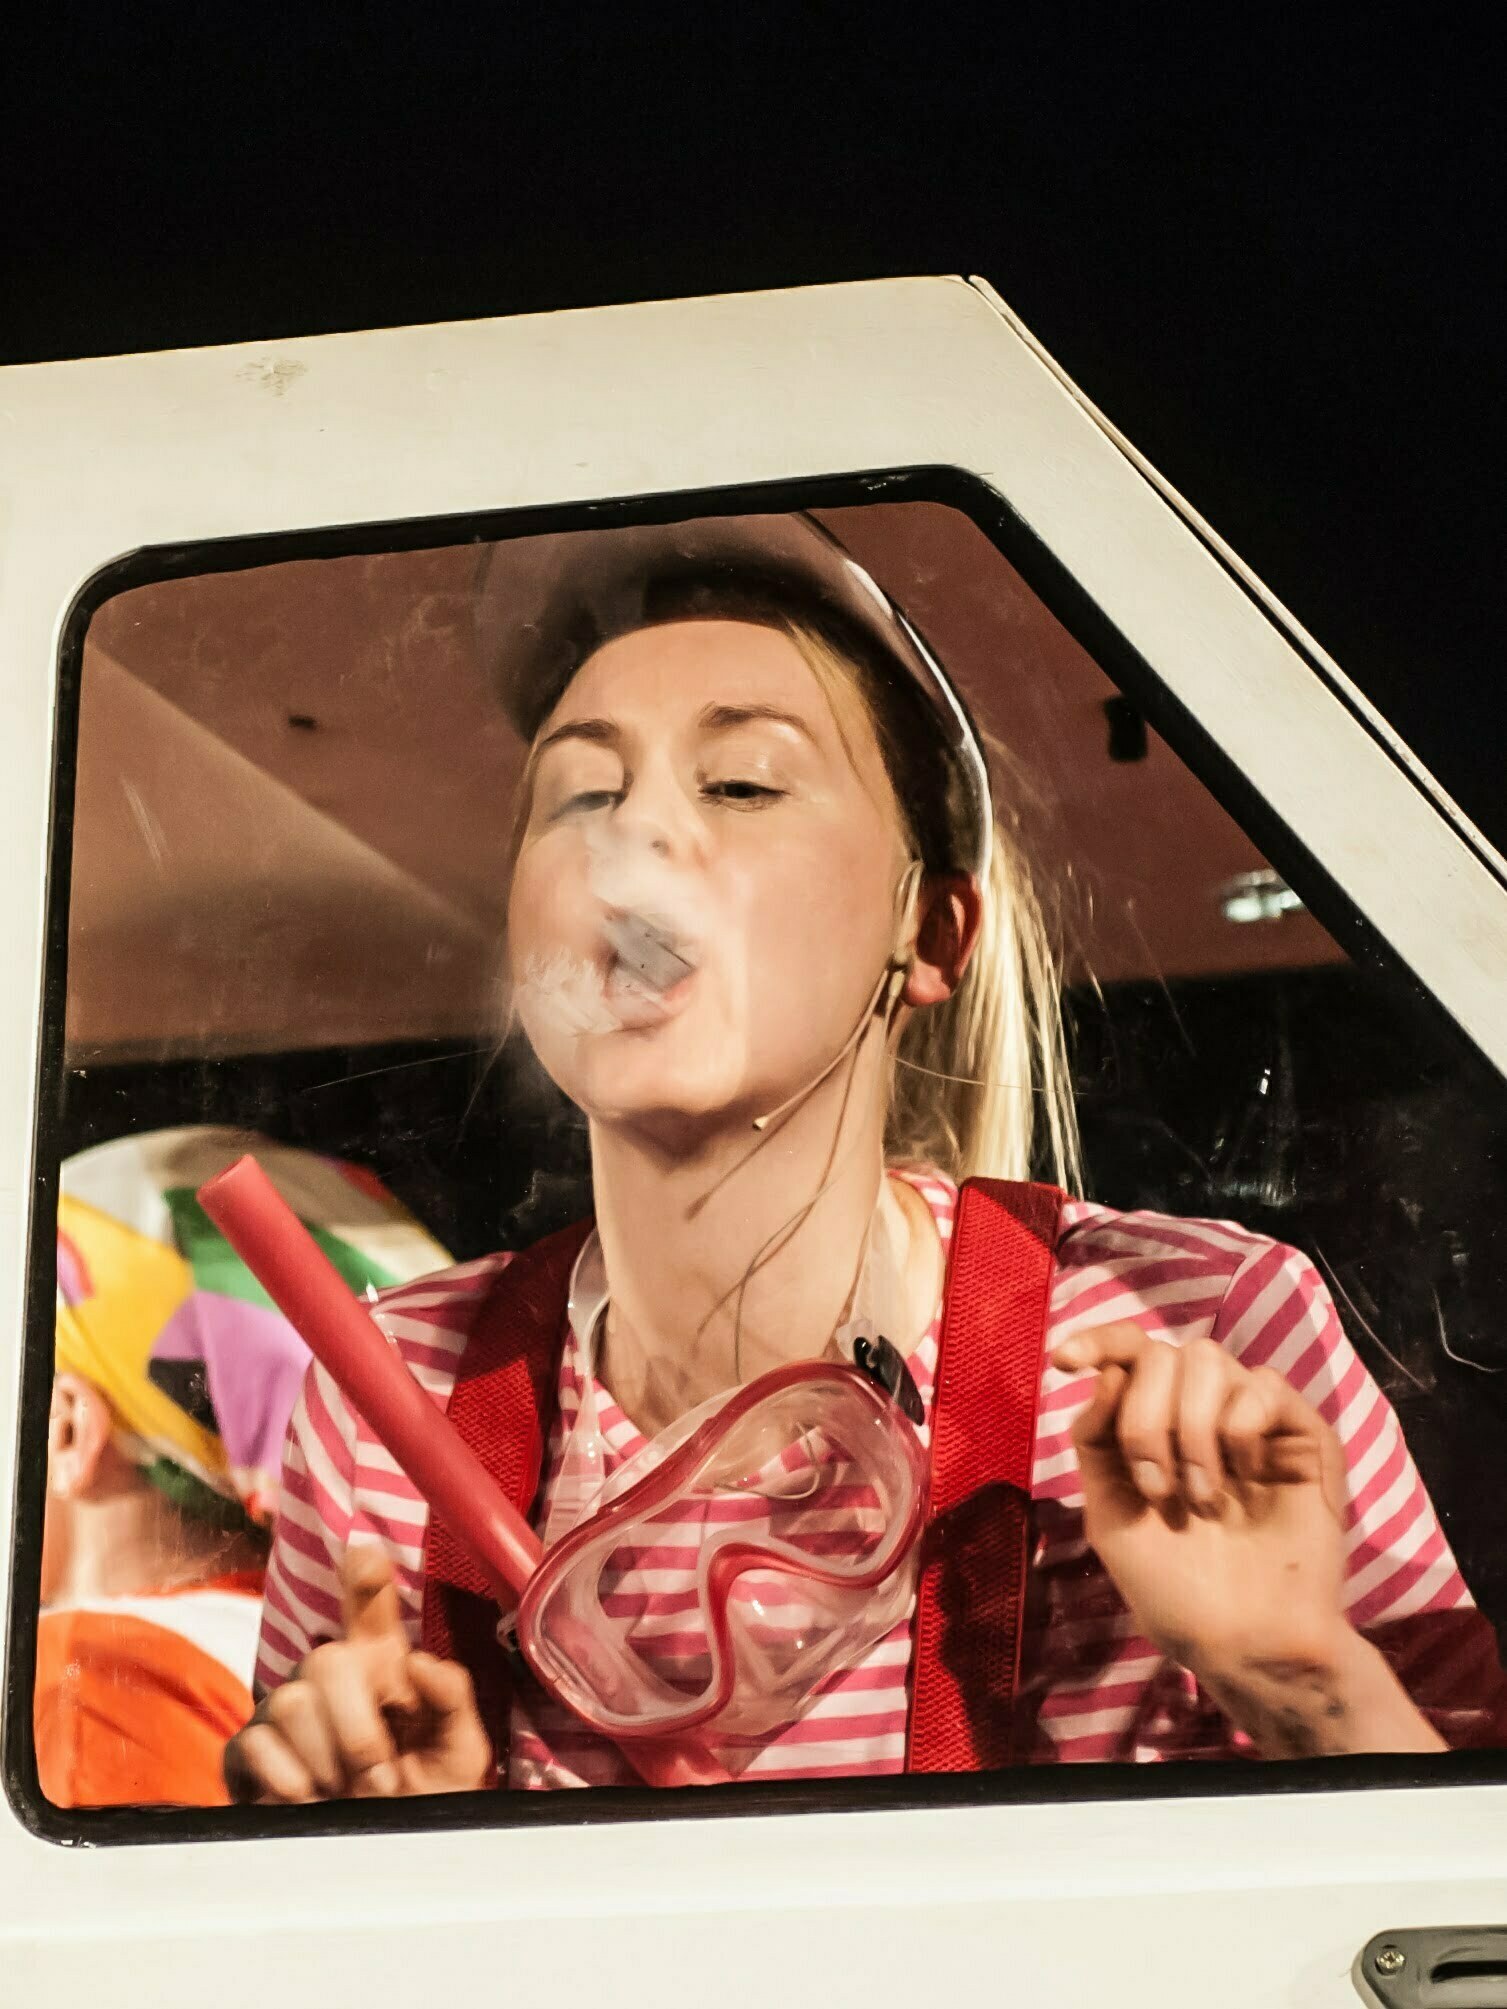 Photo from the show. A little girl sitting in a car holds diving goggles in her hand. She blows on the window's glass and steam appears on it.